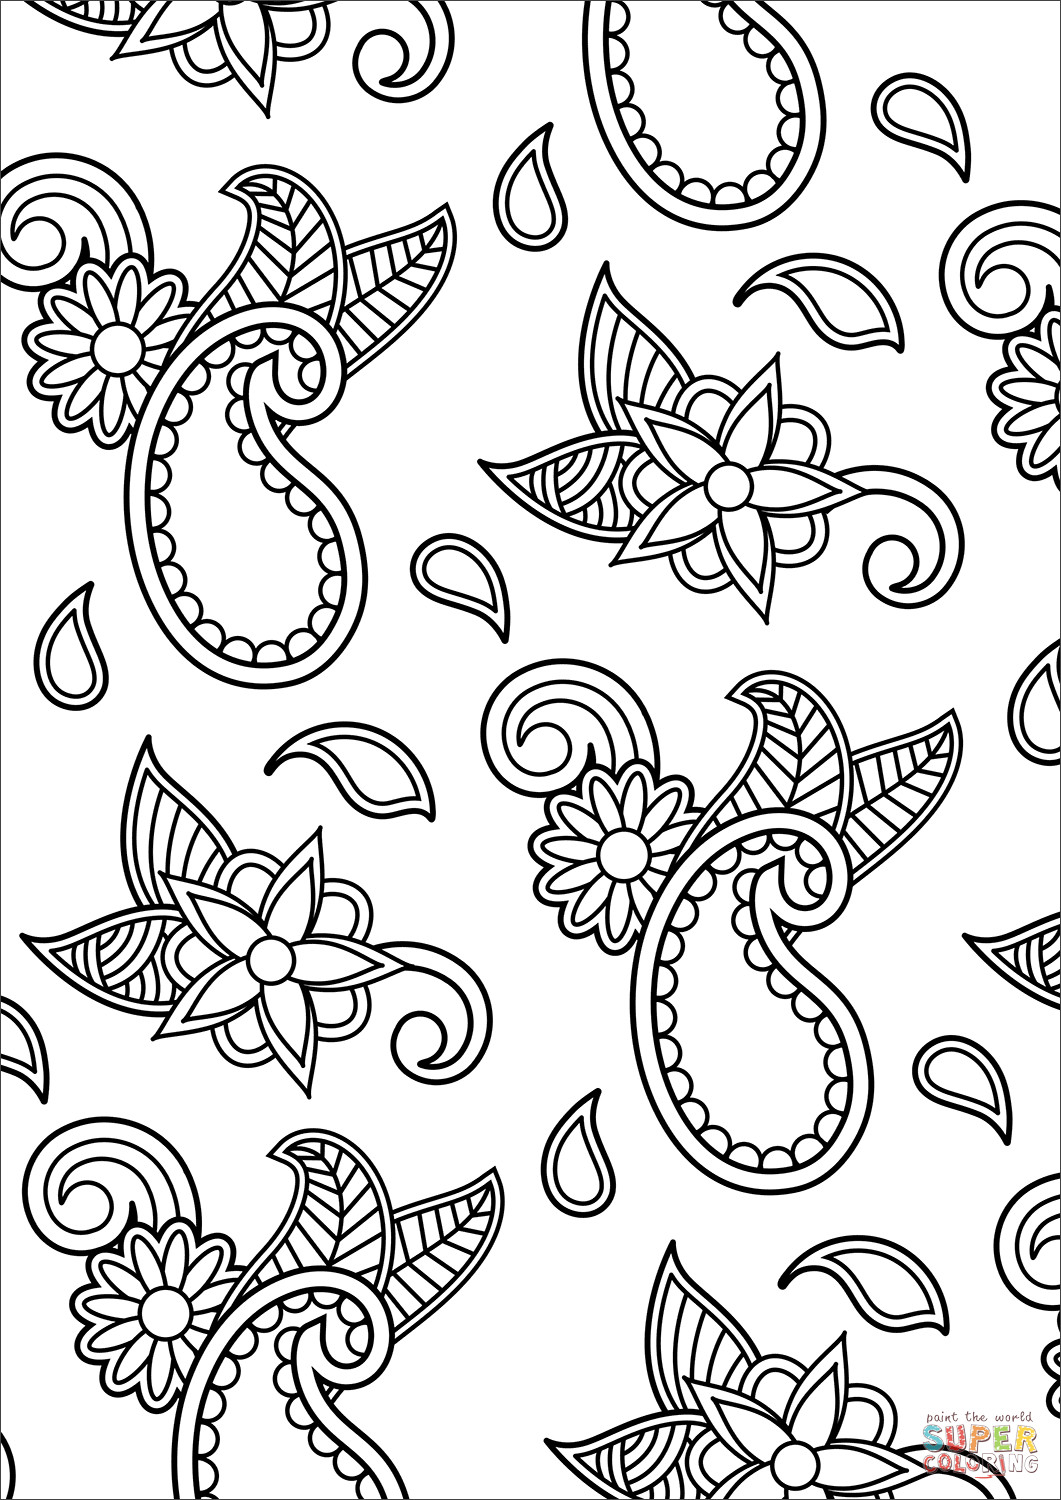 Paisley Printable Coloring Pages
 Paisley Pattern coloring page